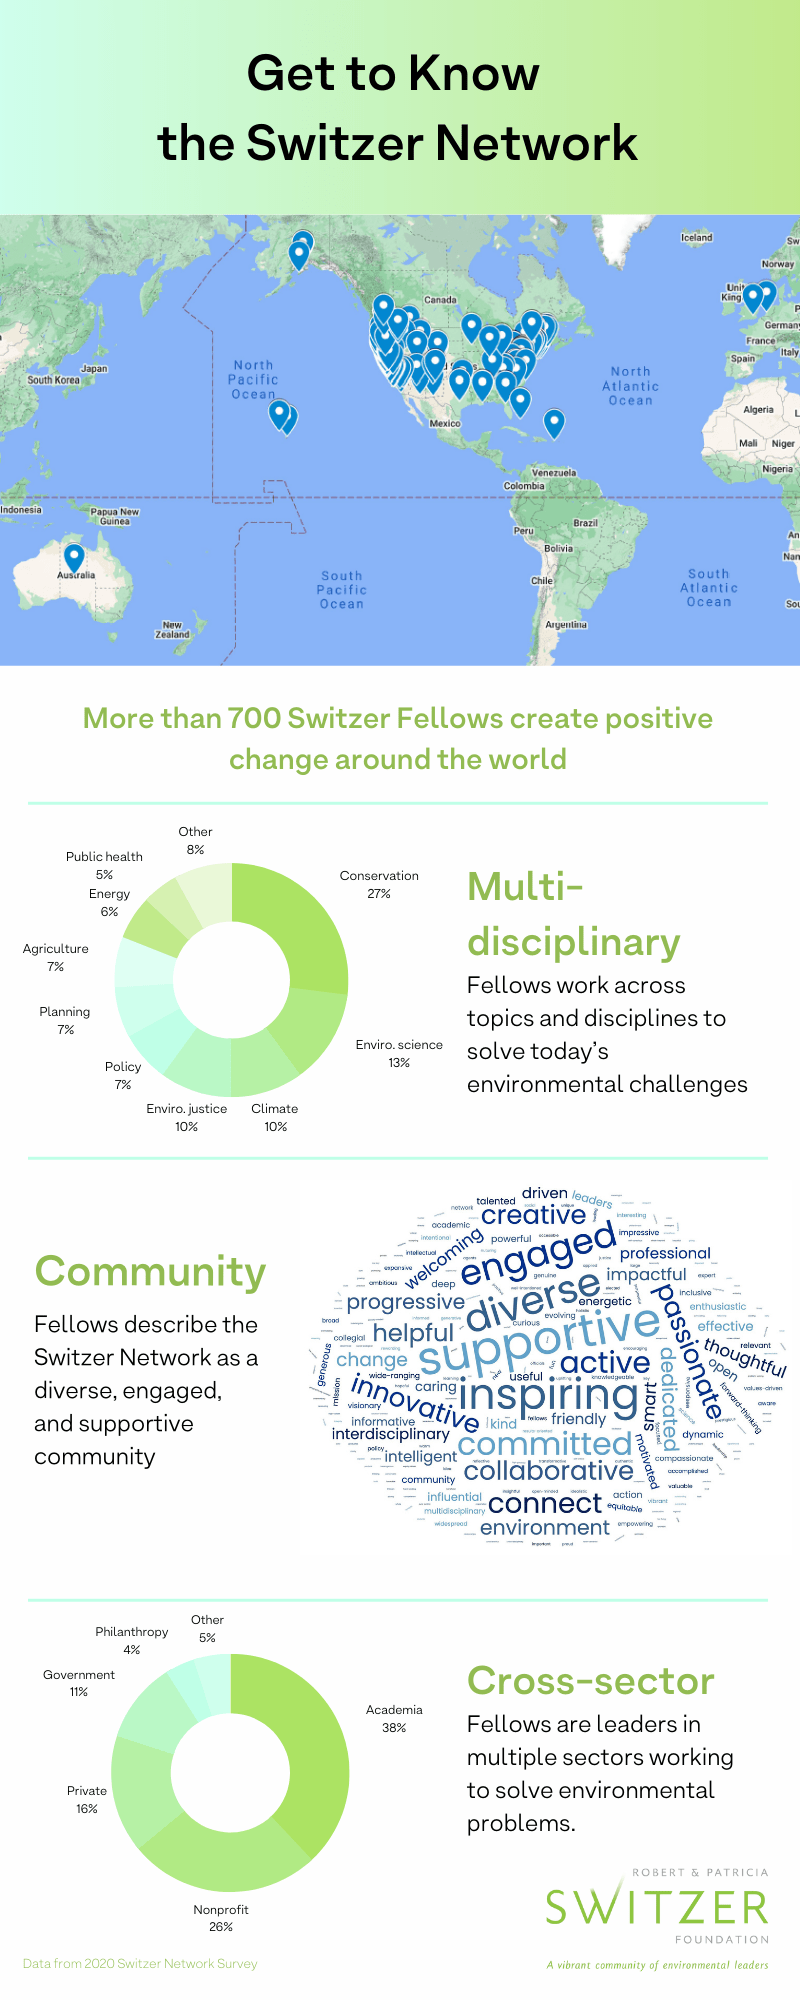 An infographic describing the geography, sectors, and fields of Switzer Fellows, with a word cloud describing the community.